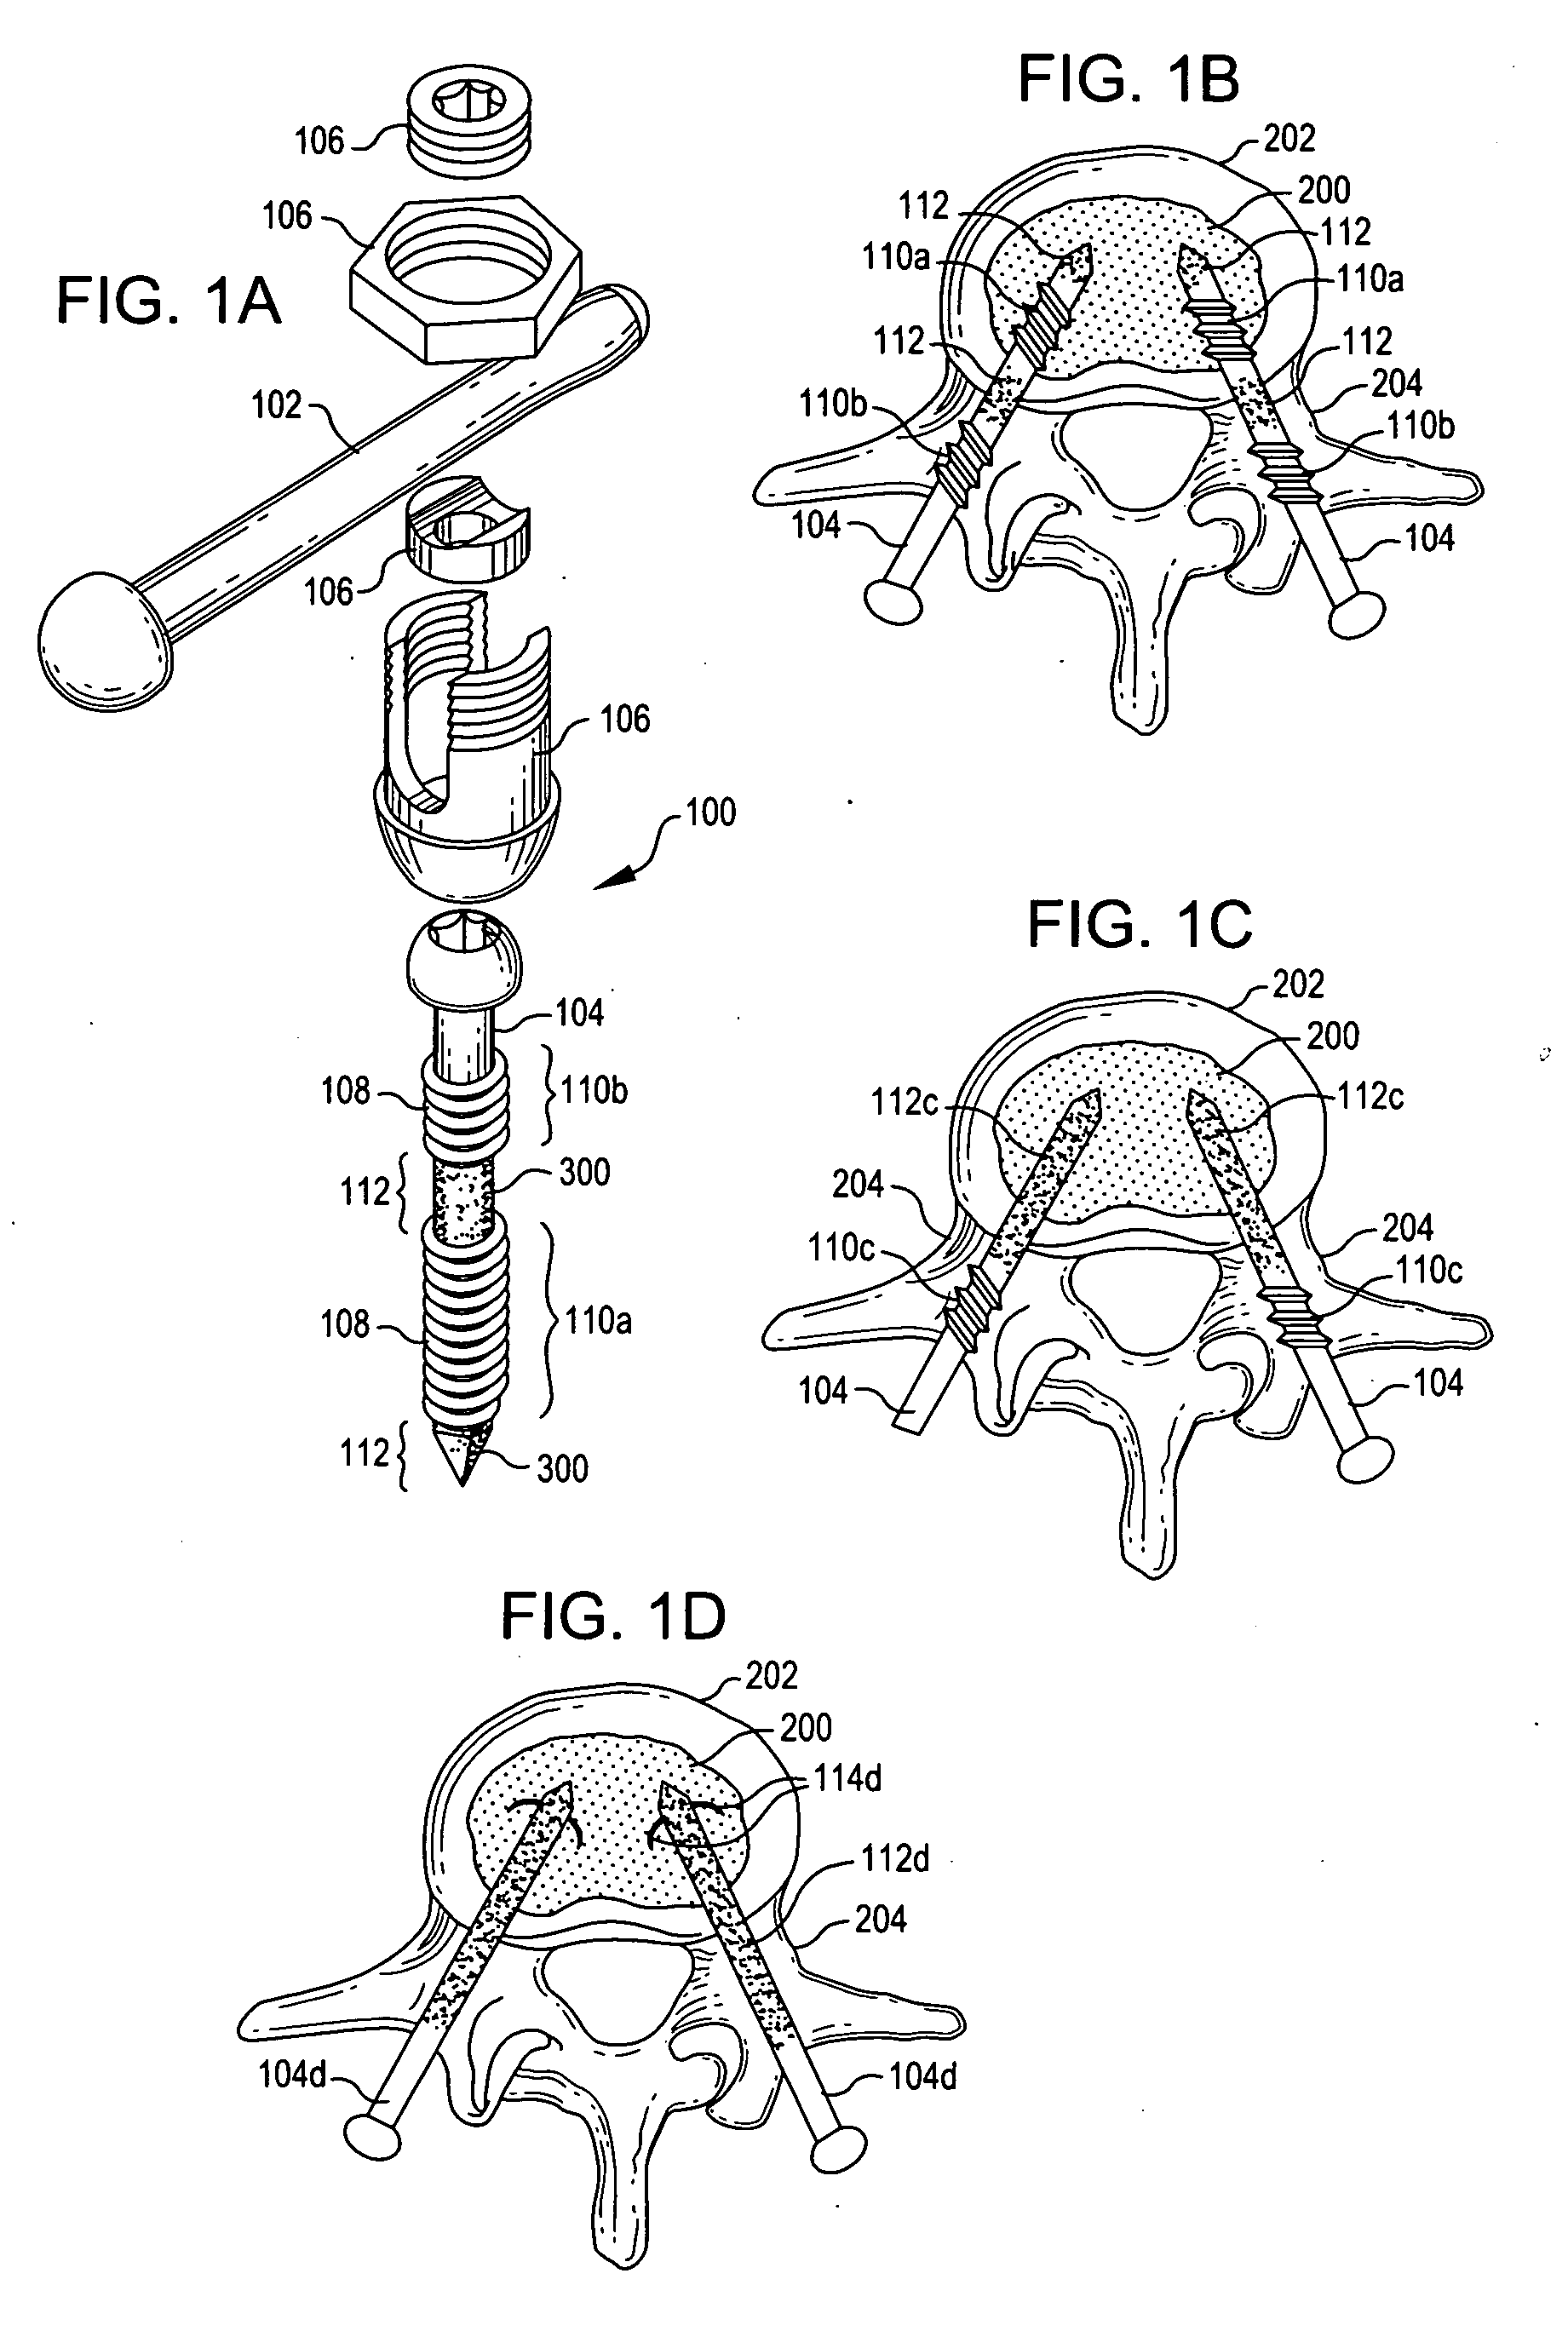 Methods and devices for improved bonding of devices to bone